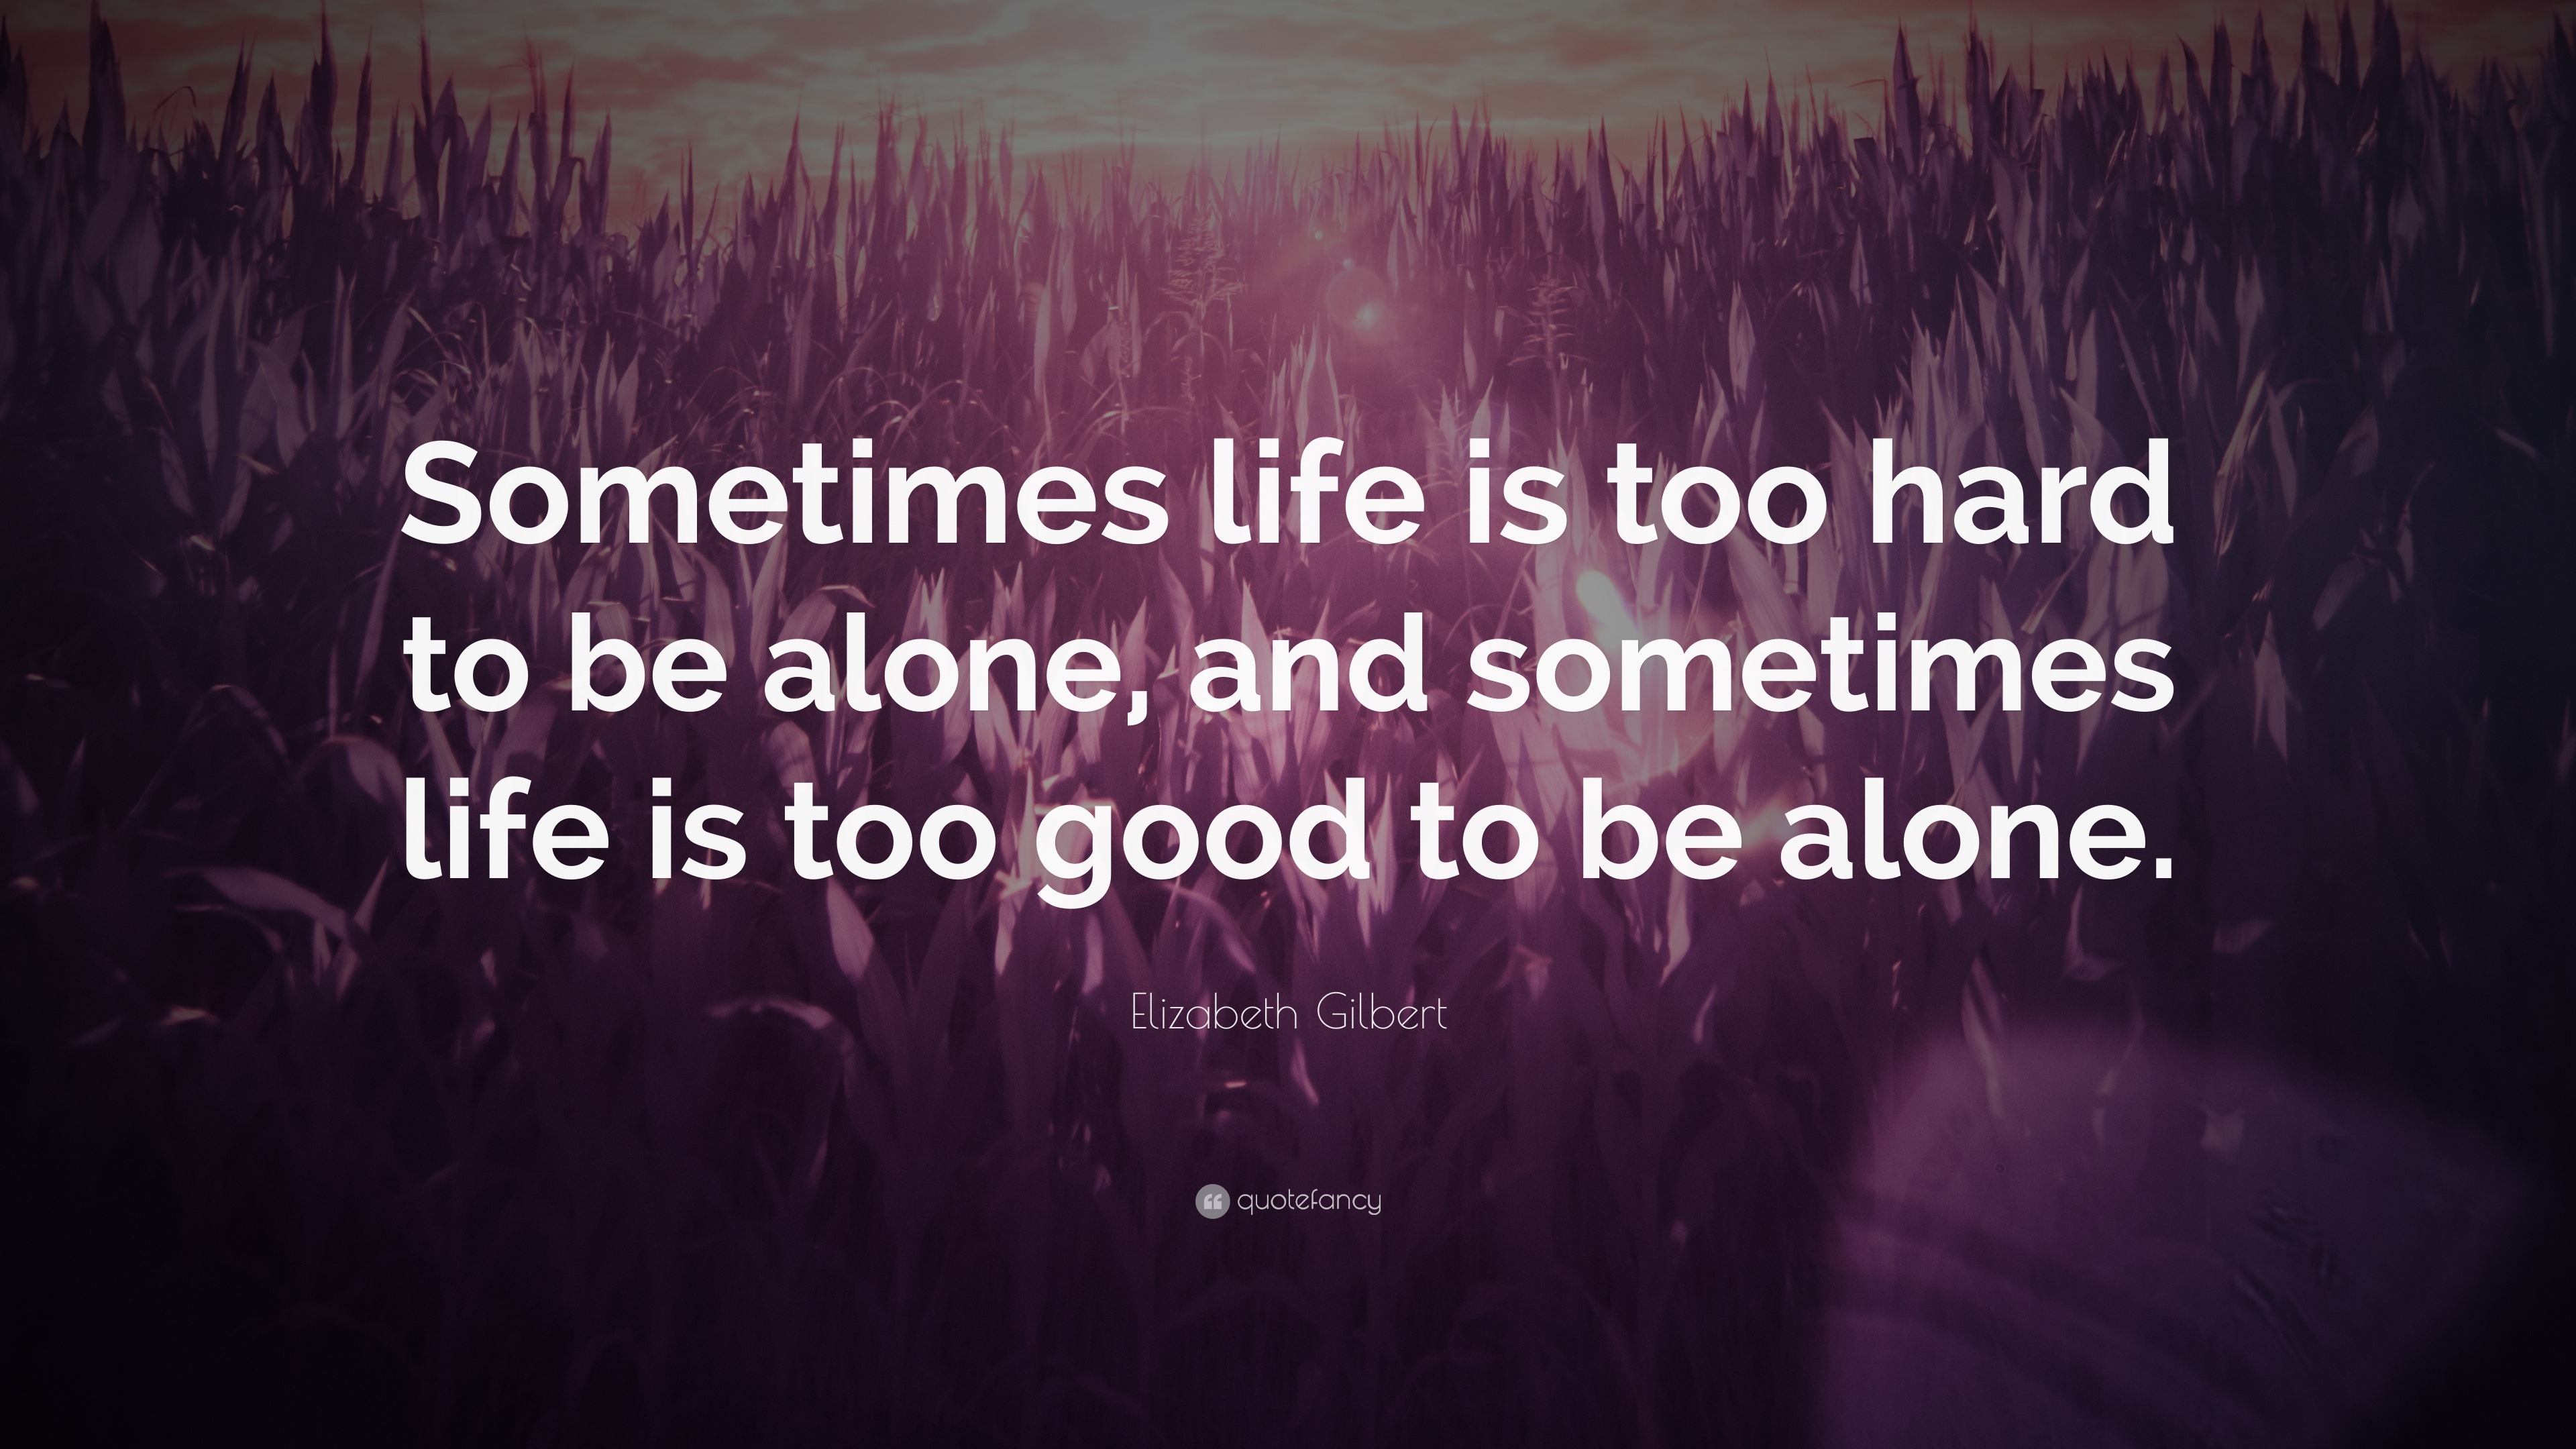 Elizabeth Gilbert Quote   Sometimes  life  is too hard to be 